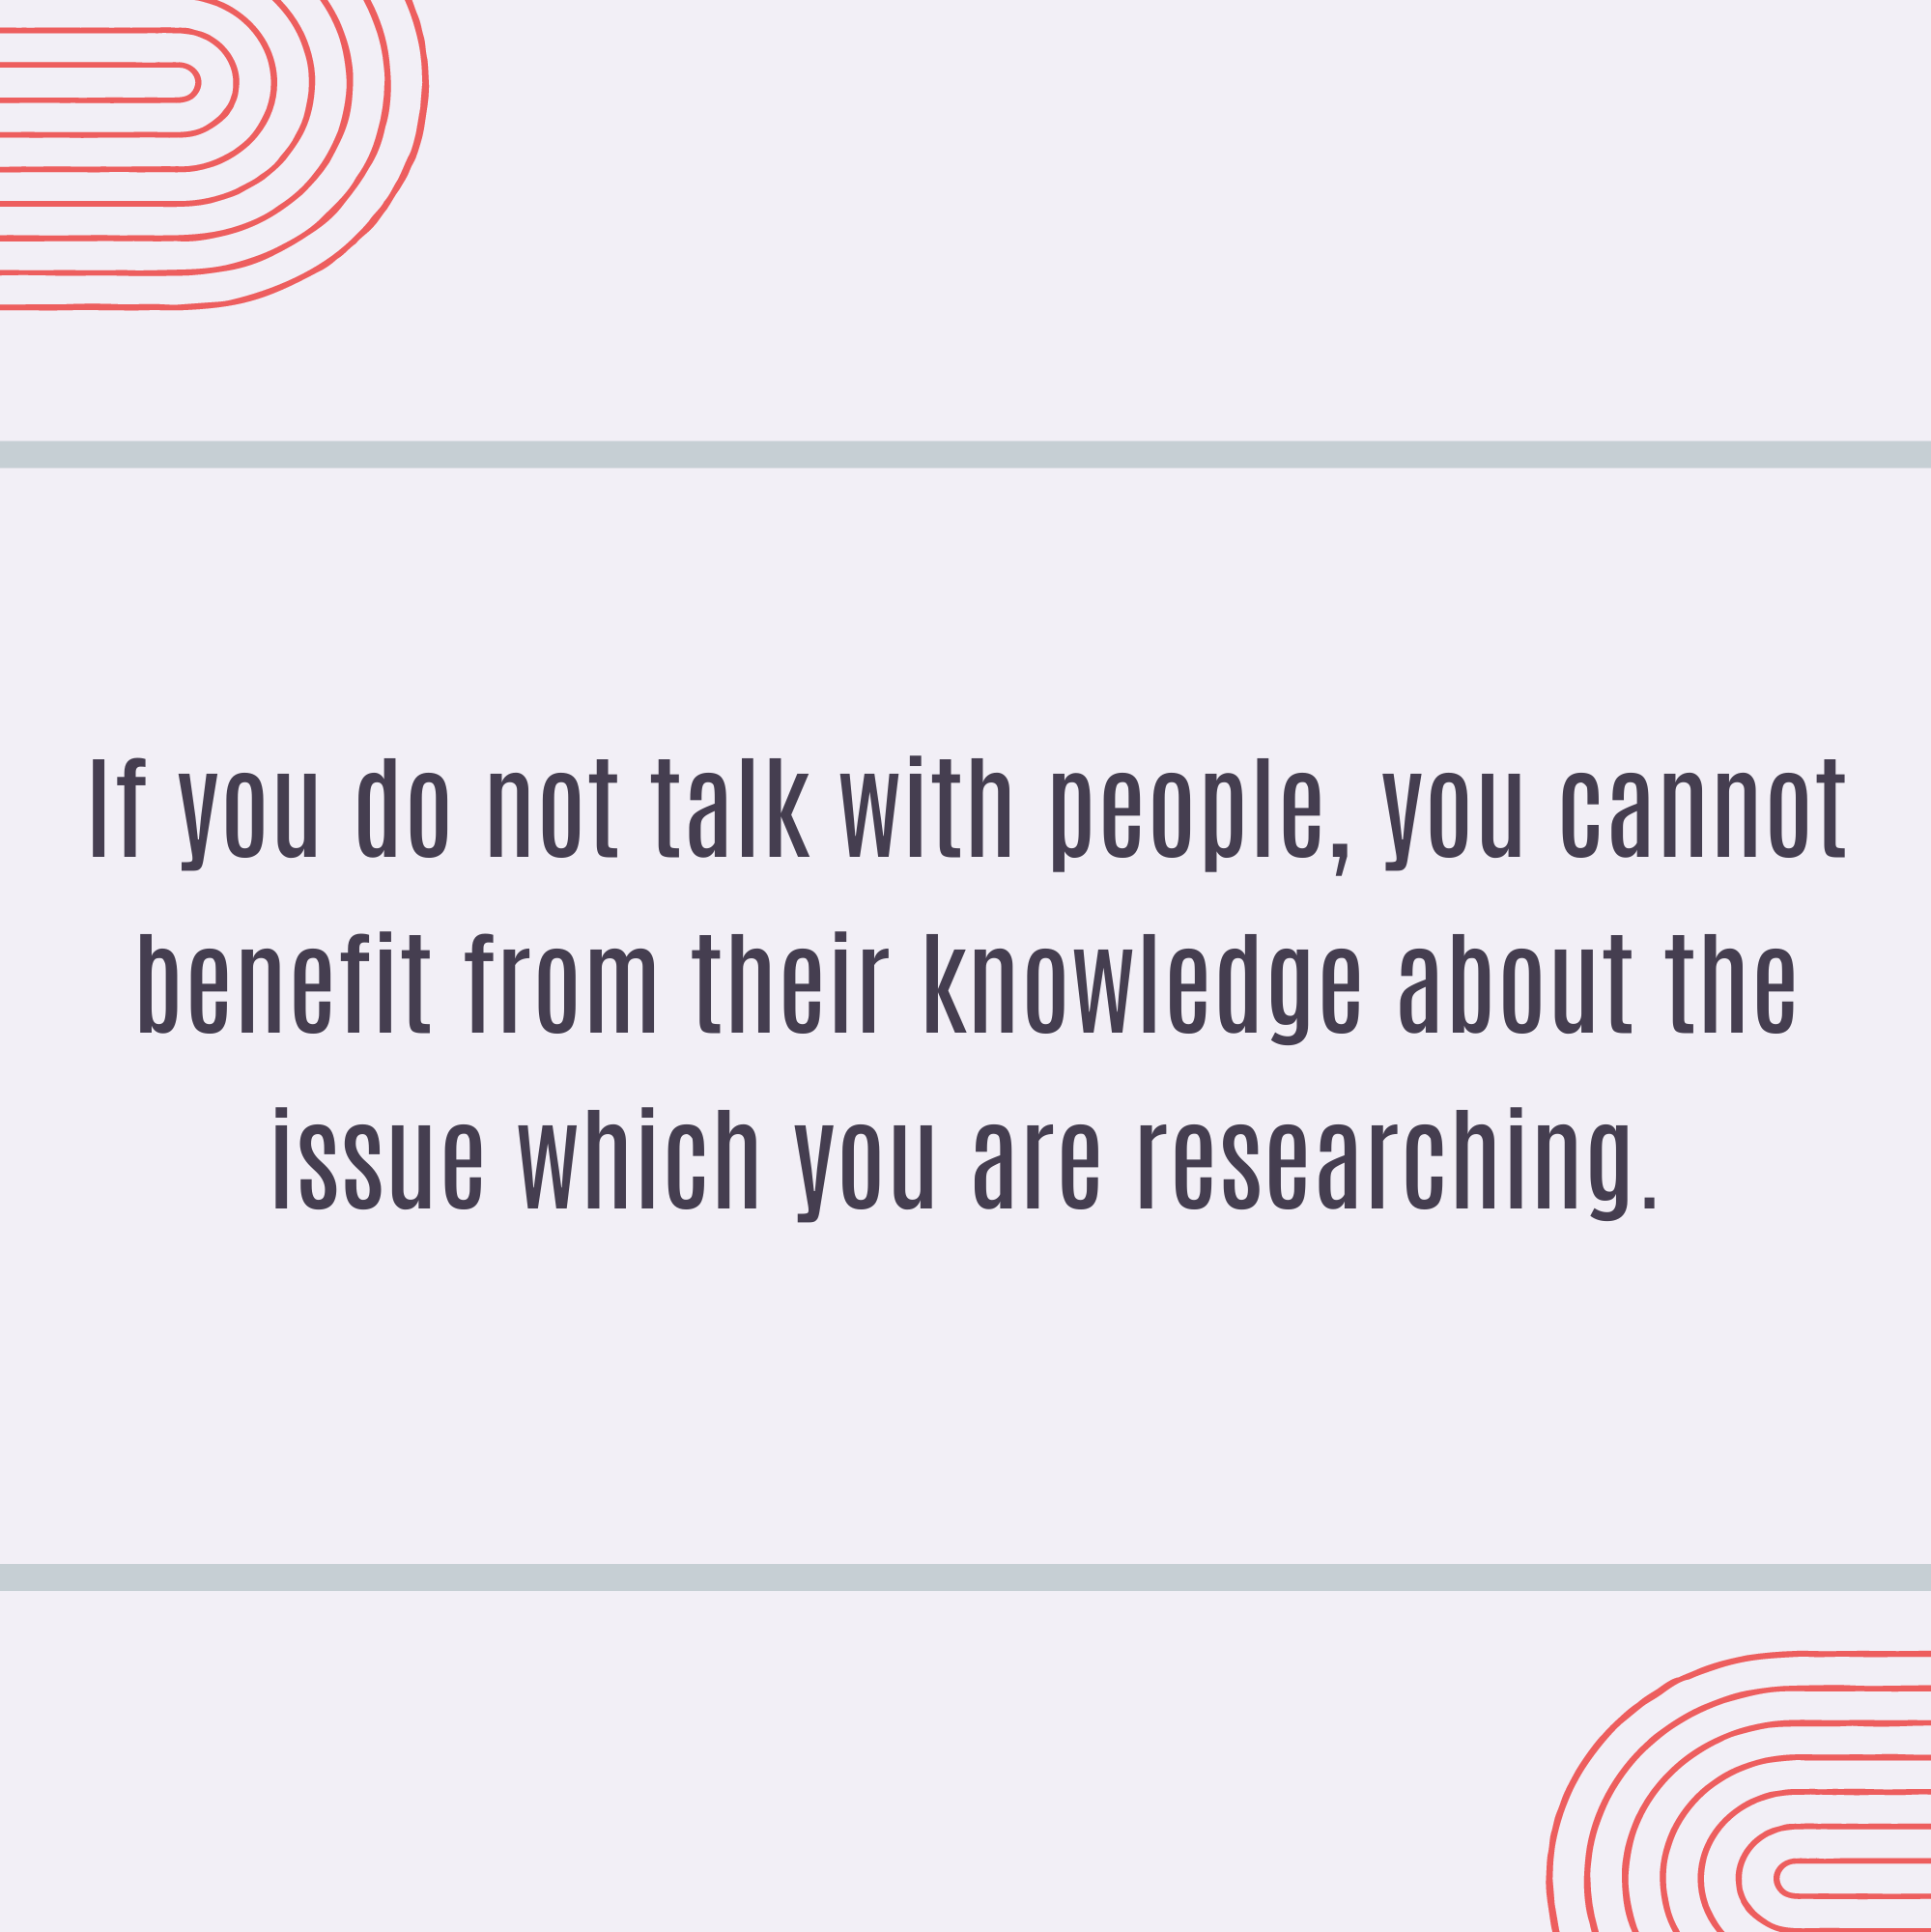 If you do not talk with people, you cannot benefit from their knowledge about the issue which you are researching.